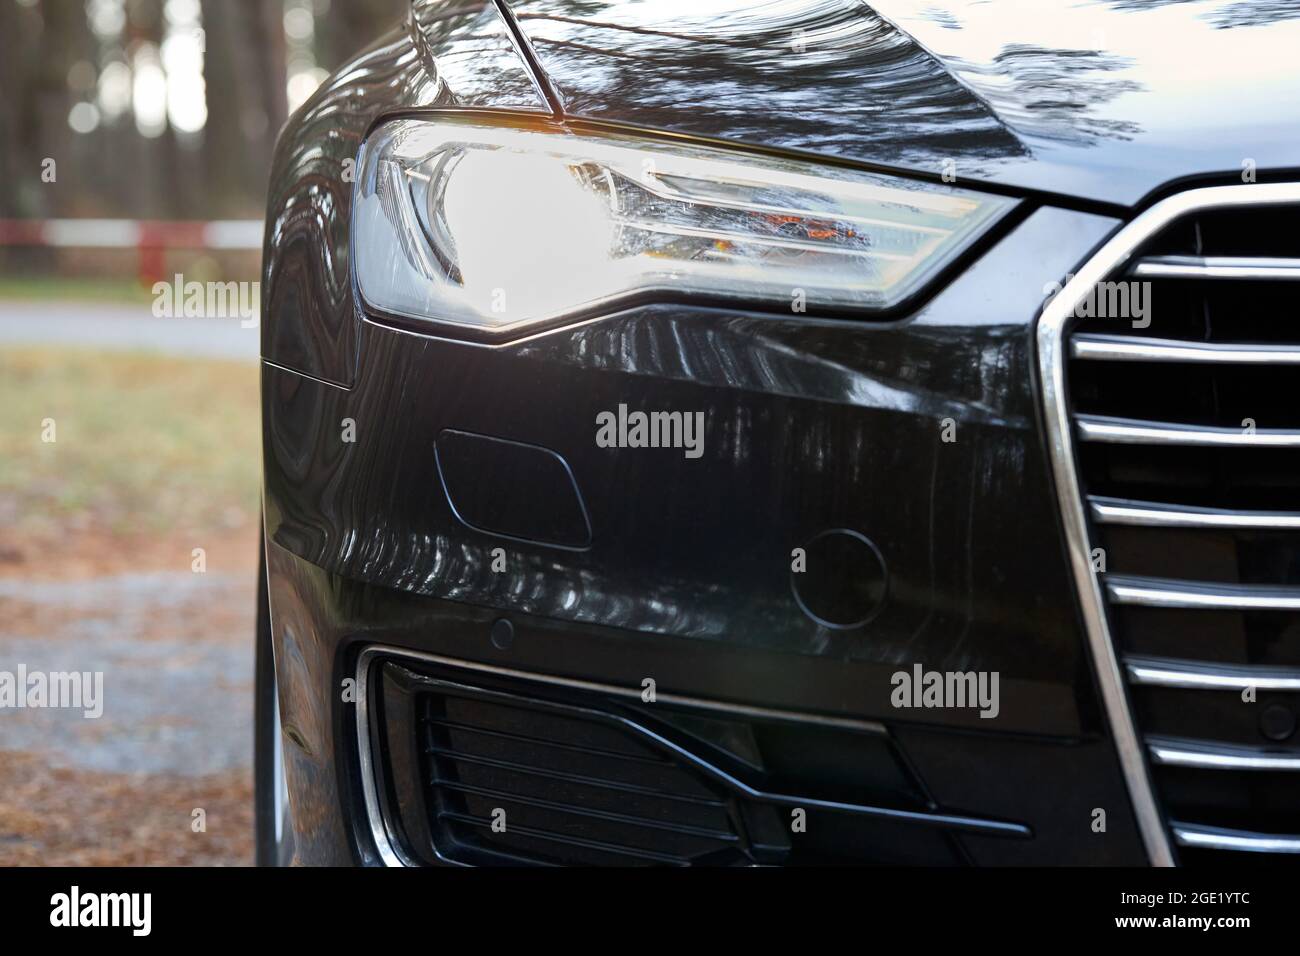 https://c8.alamy.com/comp/2GE1YTC/grodno-belarus-december-2019-audi-a6-4g-c7-luxury-black-car-parts-right-front-xenon-luminous-headlight-and-fog-light-with-bumper-radiator-grille-2GE1YTC.jpg